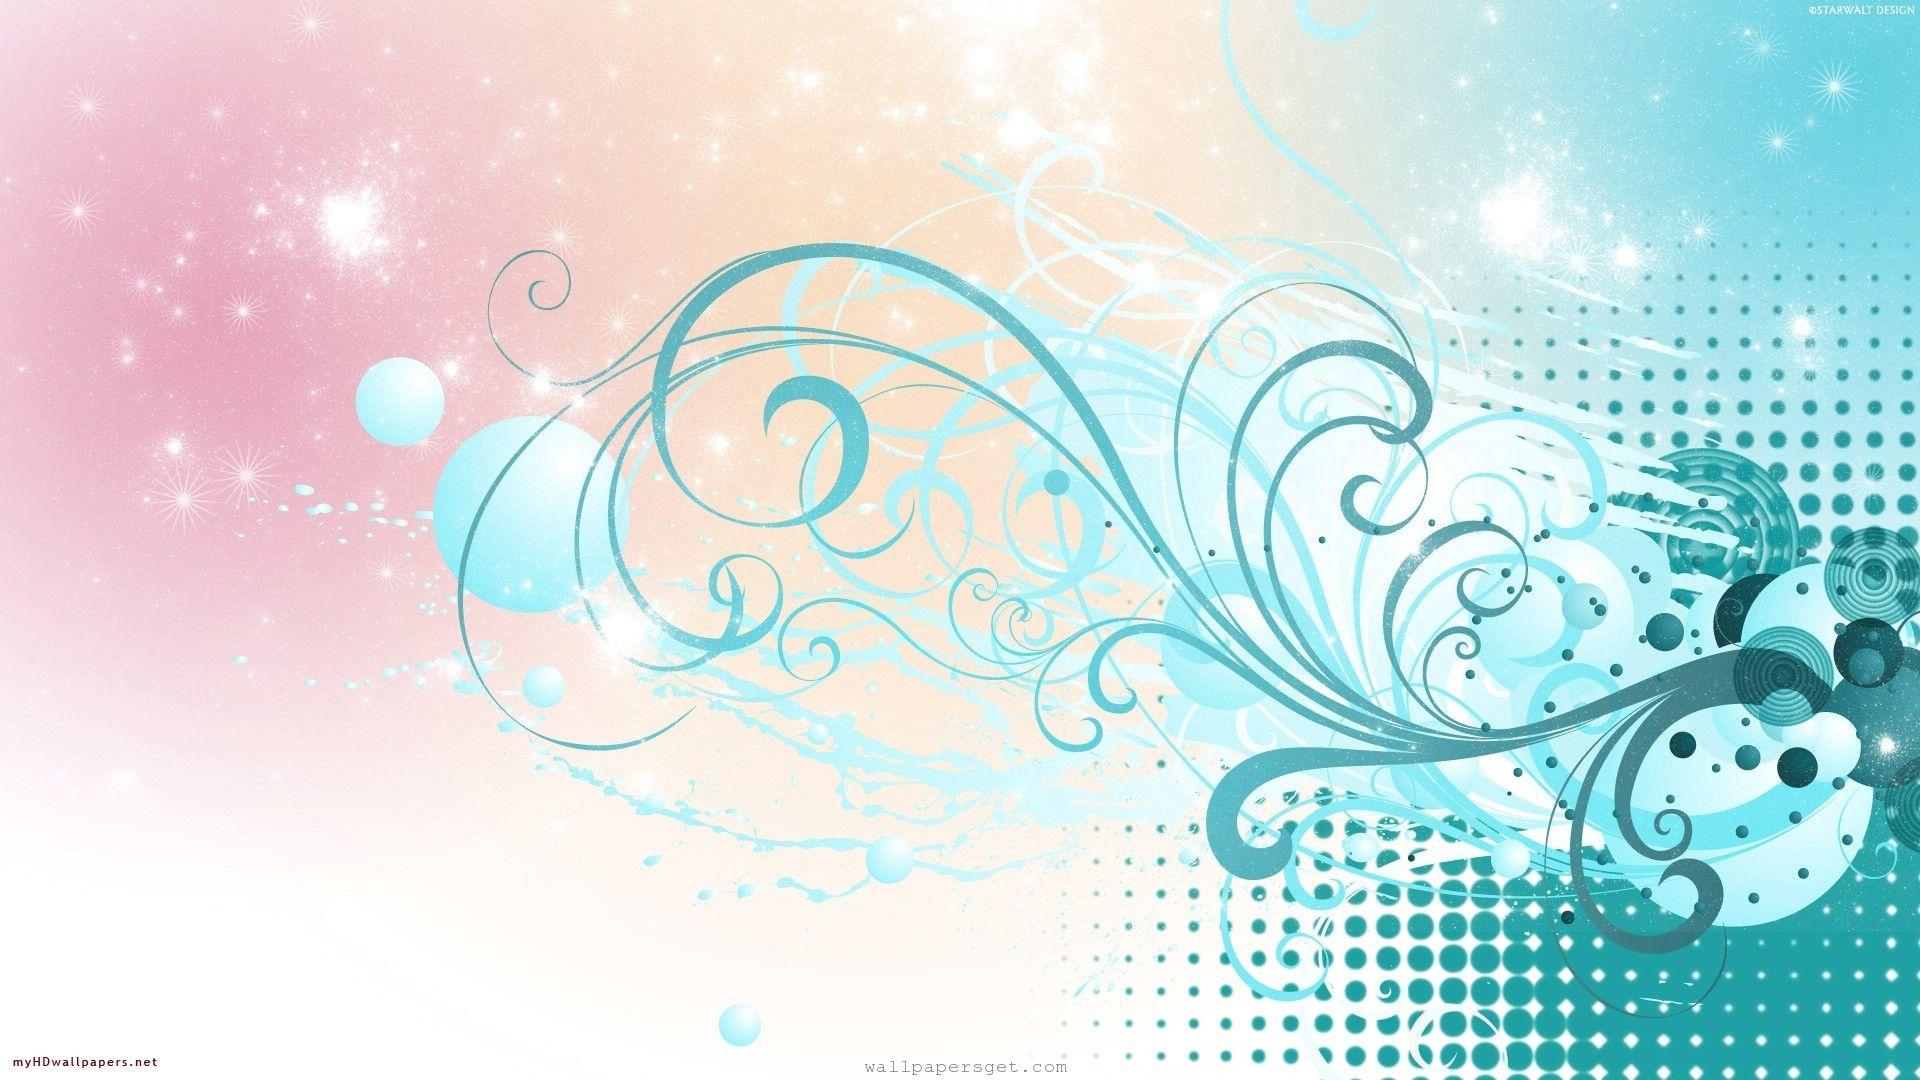 Beautiful designed background for your background